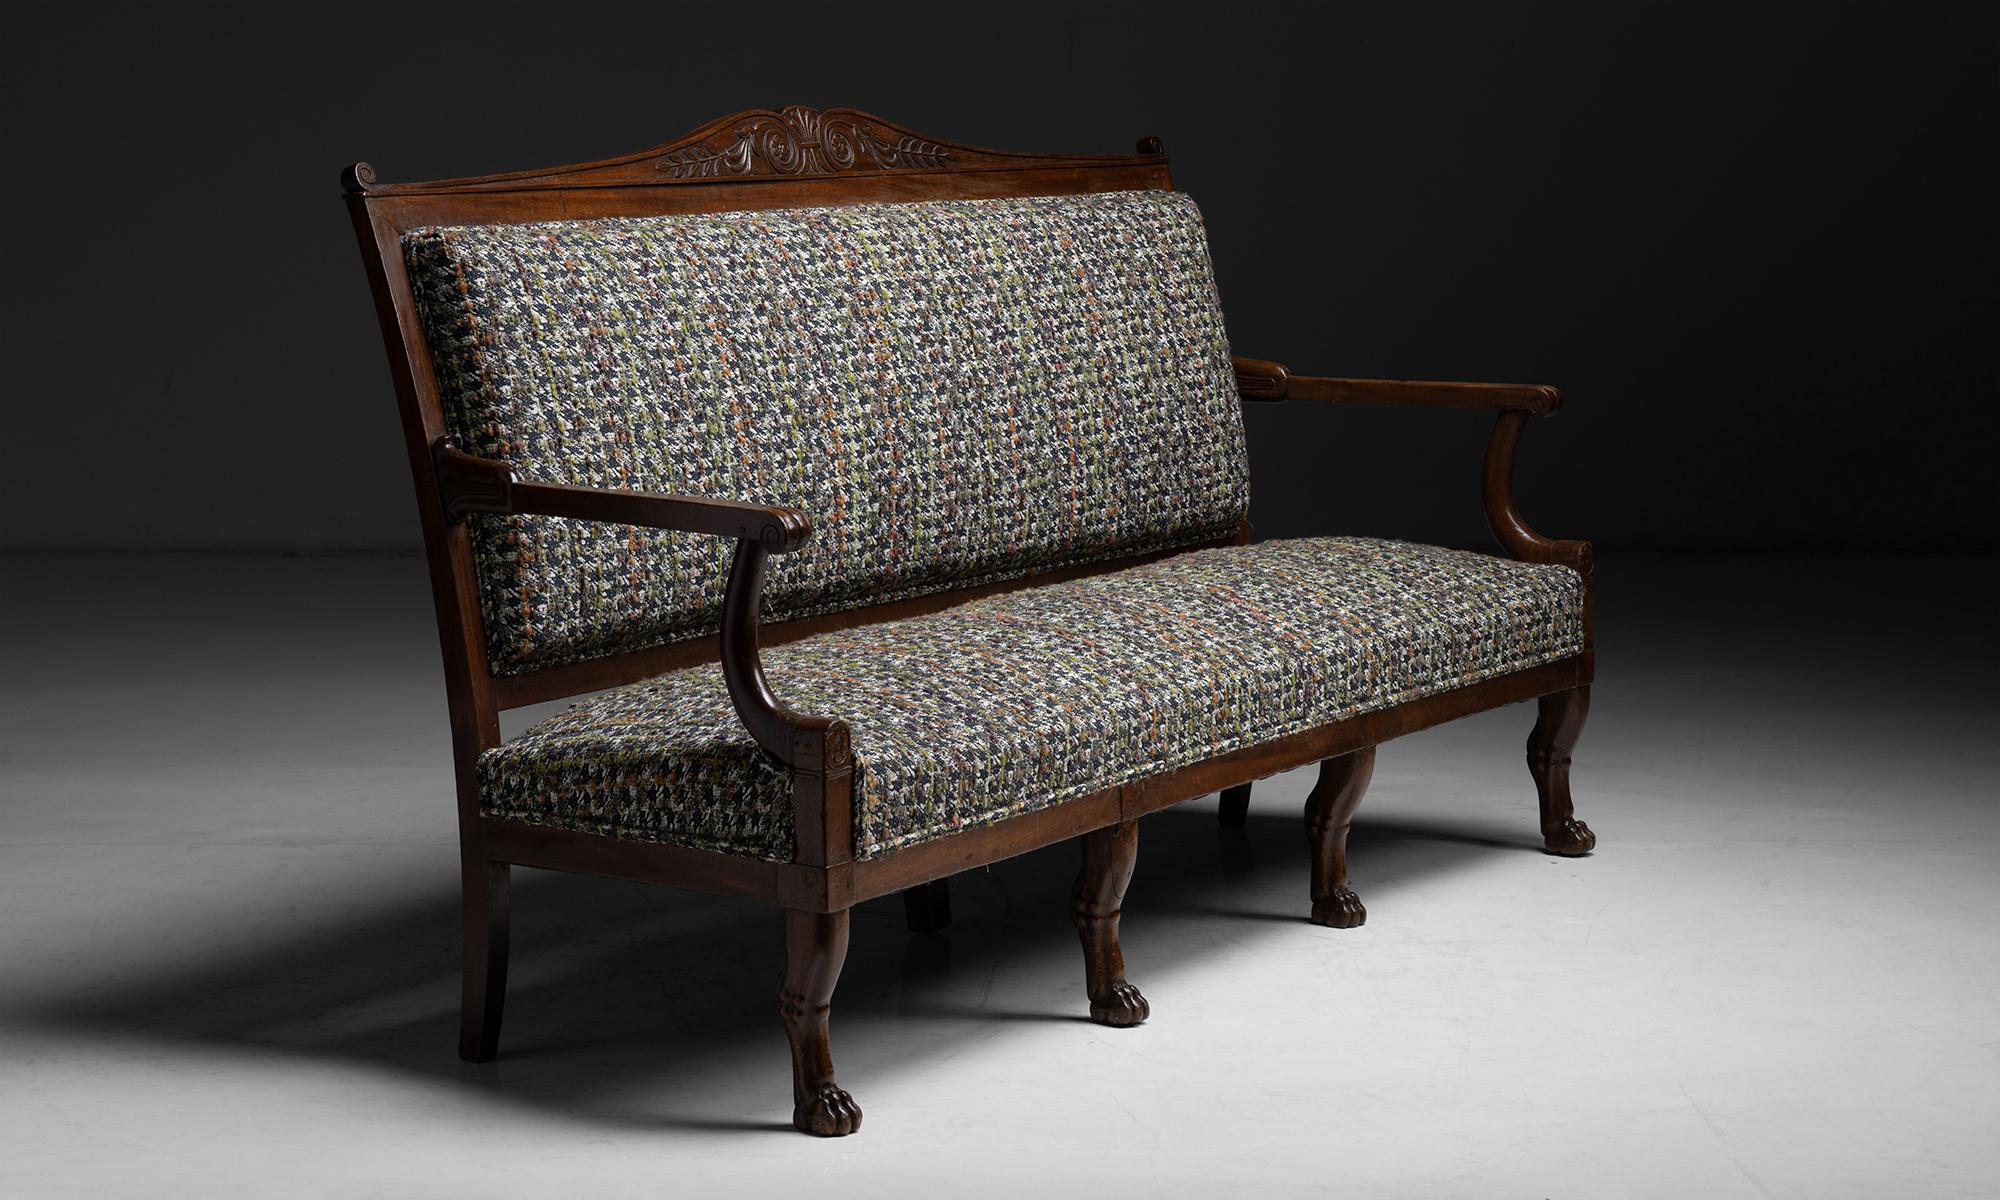 Hand-Carved Empire Sofa in Textured Wool Blend, France, circa 1840 For Sale